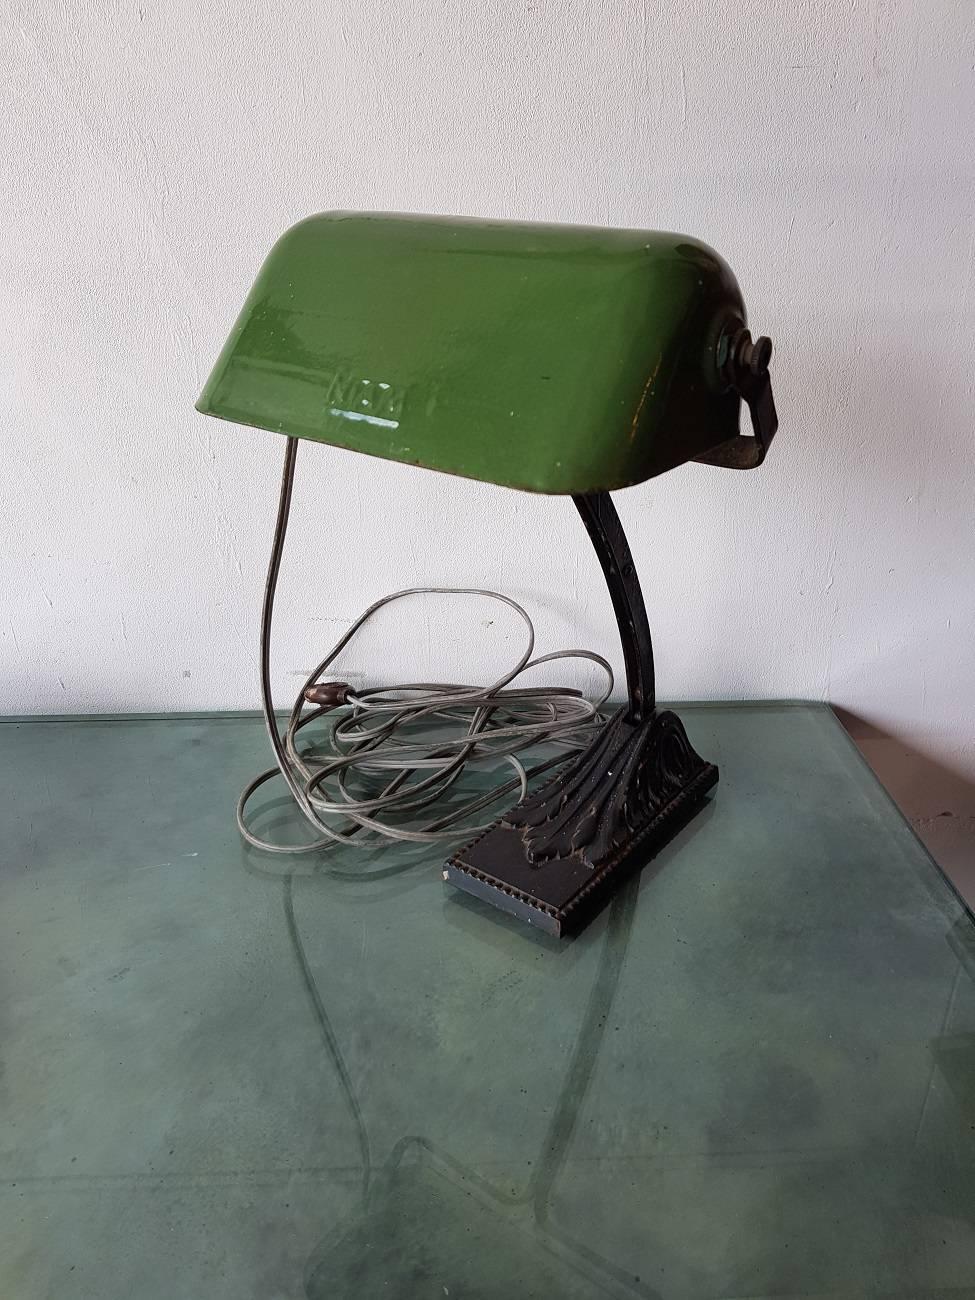 Old French cast iron and adjustable Notary/Bankers desk lamp with enamel cap and marked Niam, first half of the 20th century.

The measurements are,
Depth 20 cm/ 7.8 inch.
Width 24 cm/ 9.4 inch.
Height 41 cm/ 16.1 inch.
 